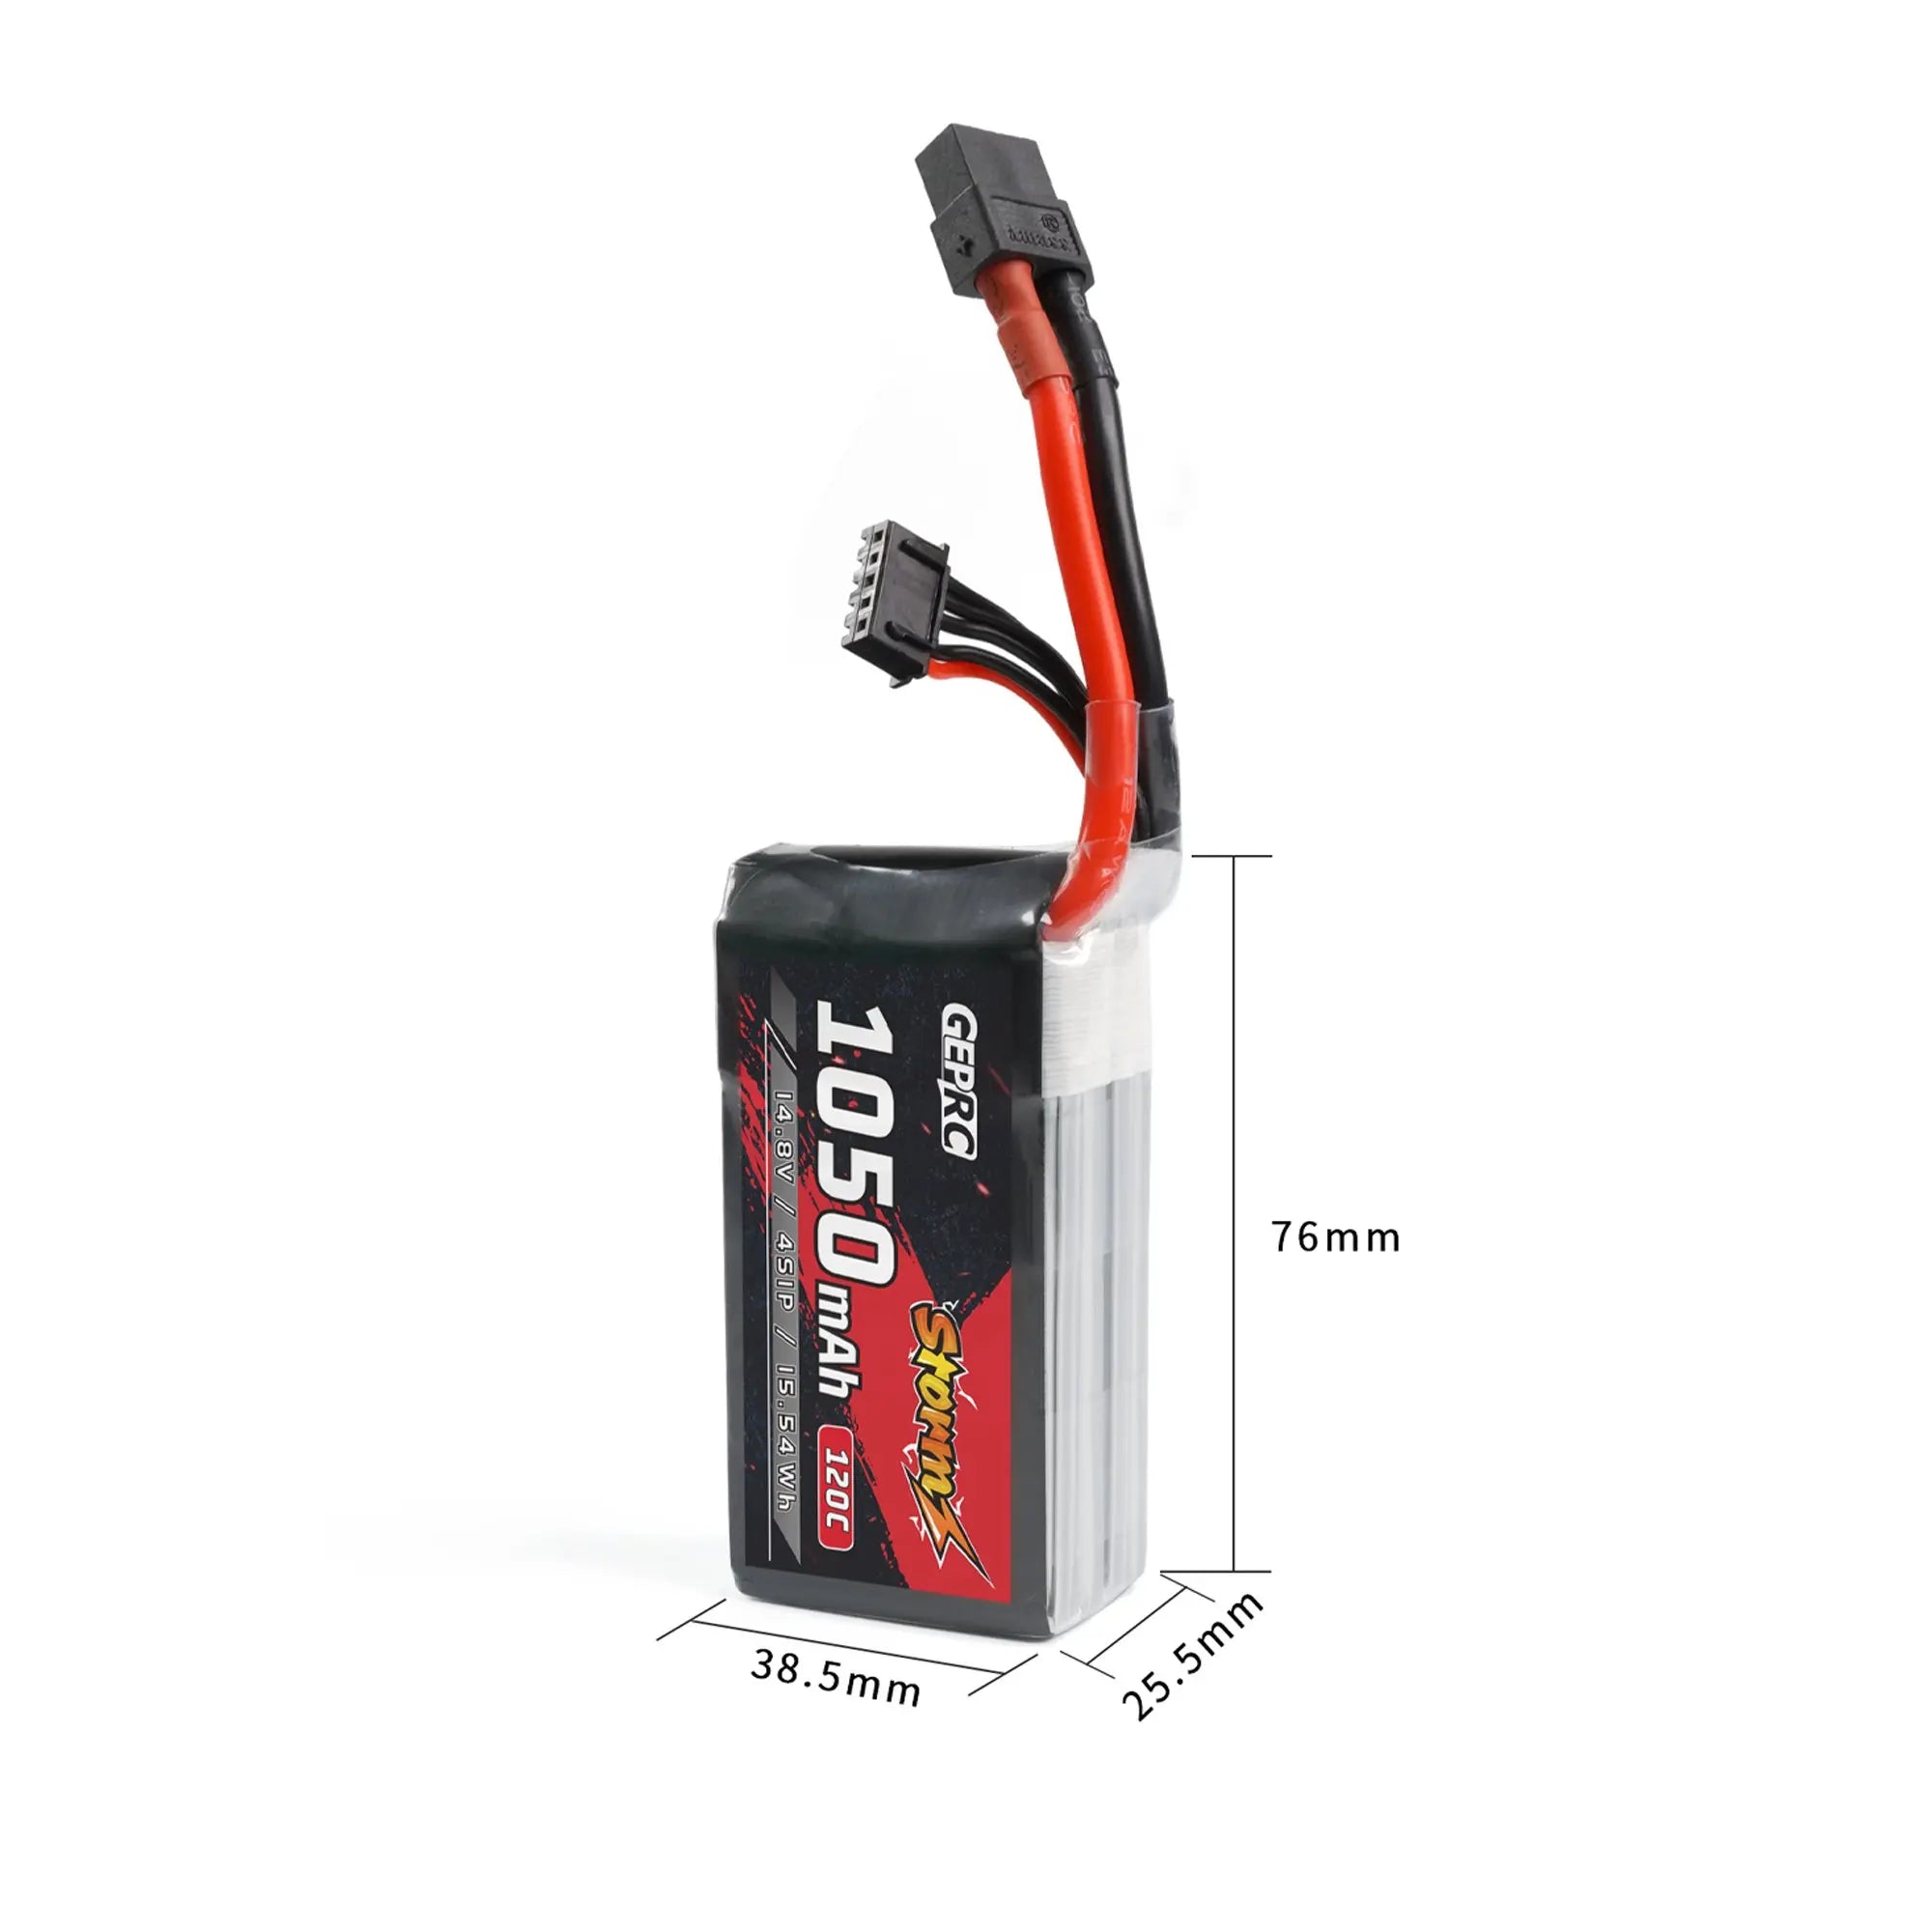 GEPRC Storm 4S 1050mAh 120C Lipo FV Battery, A: It is recommended to use the HOTA D6 PRO charger, ISDT 608